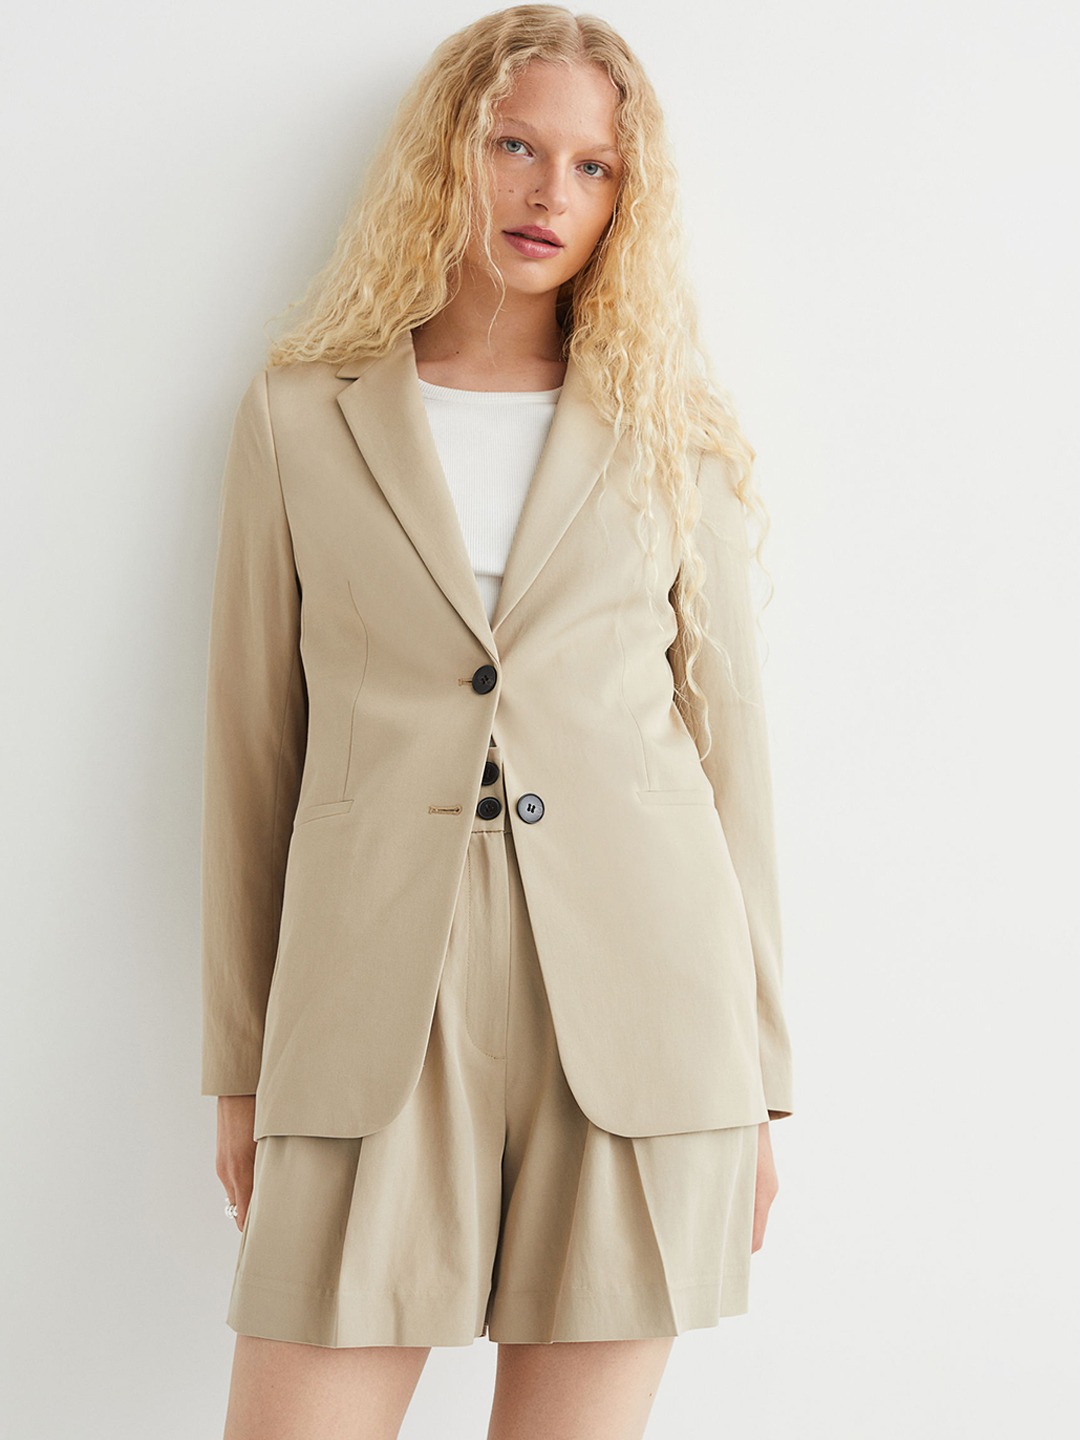 Clothing Blazers | H&M Women Beige Tailored Fit Single-Breasted Jacket - NP30553